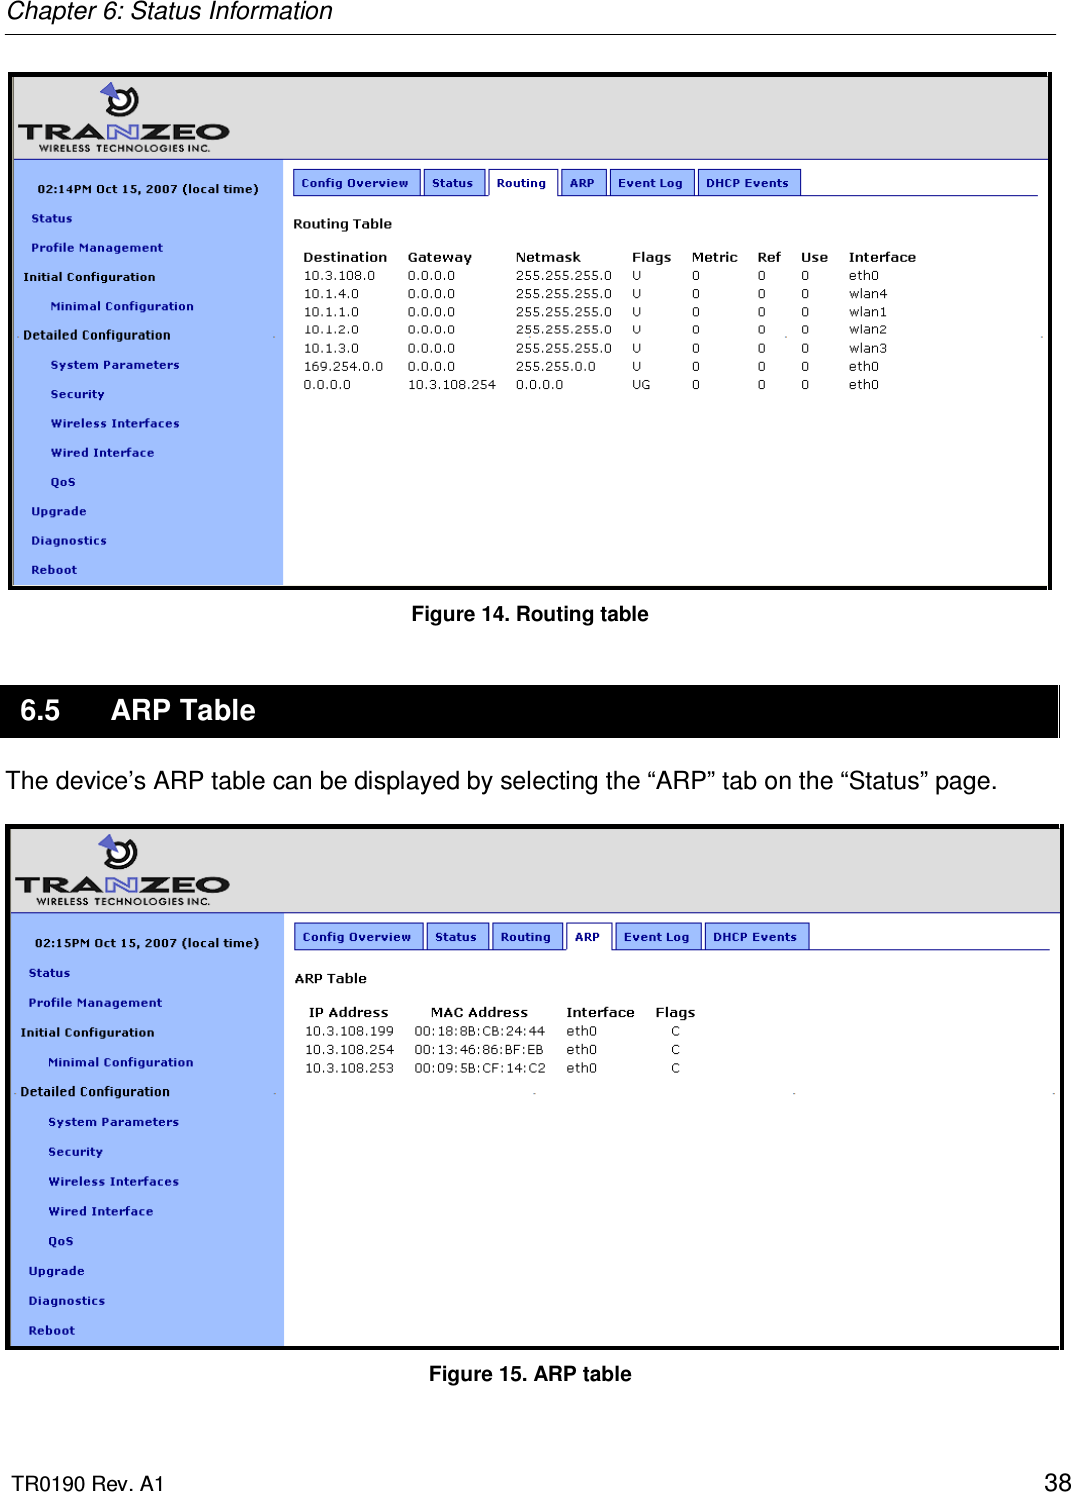 Chapter 6: Status Information  TR0190 Rev. A1    38  Figure 14. Routing table 6.5  ARP Table The device’s ARP table can be displayed by selecting the “ARP” tab on the “Status” page.   Figure 15. ARP table 